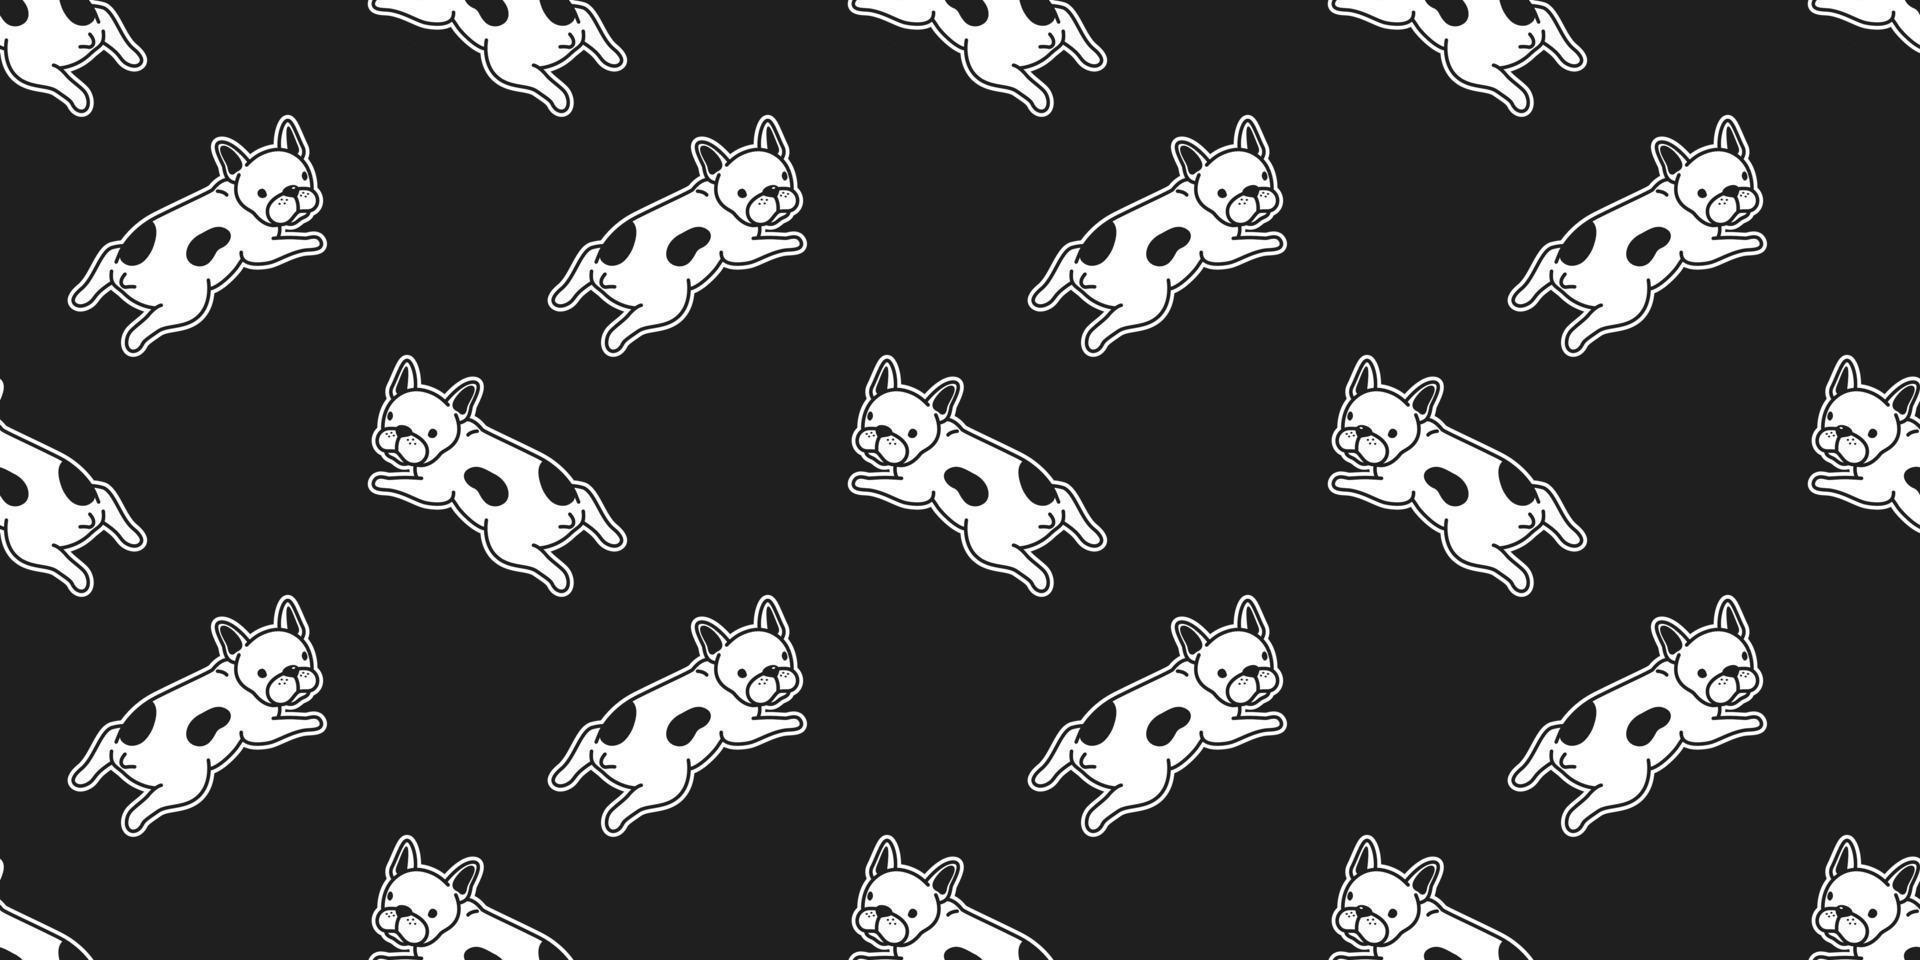 Dog seamless pattern vector french bulldog pug dog toy puppy repeat background wallpaper